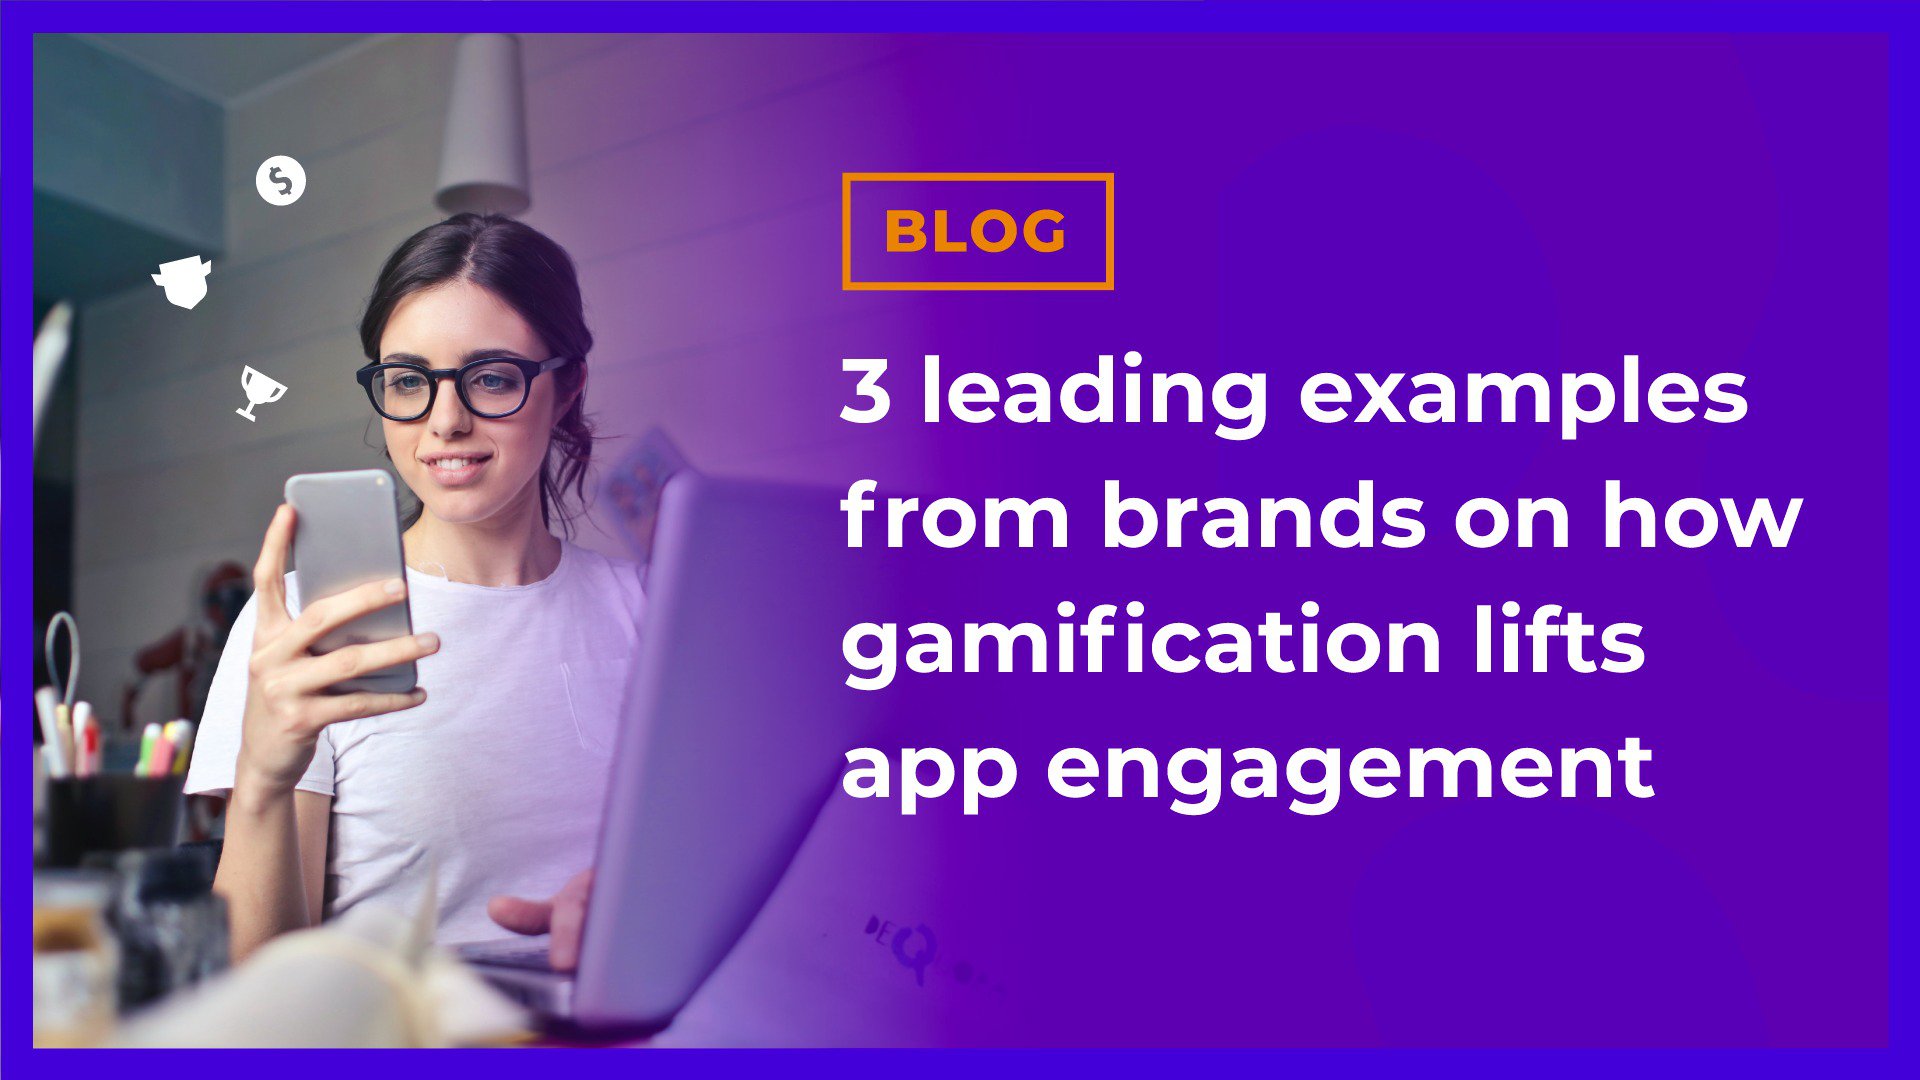 3 leading examples from brands on how gamification lifts app engagement